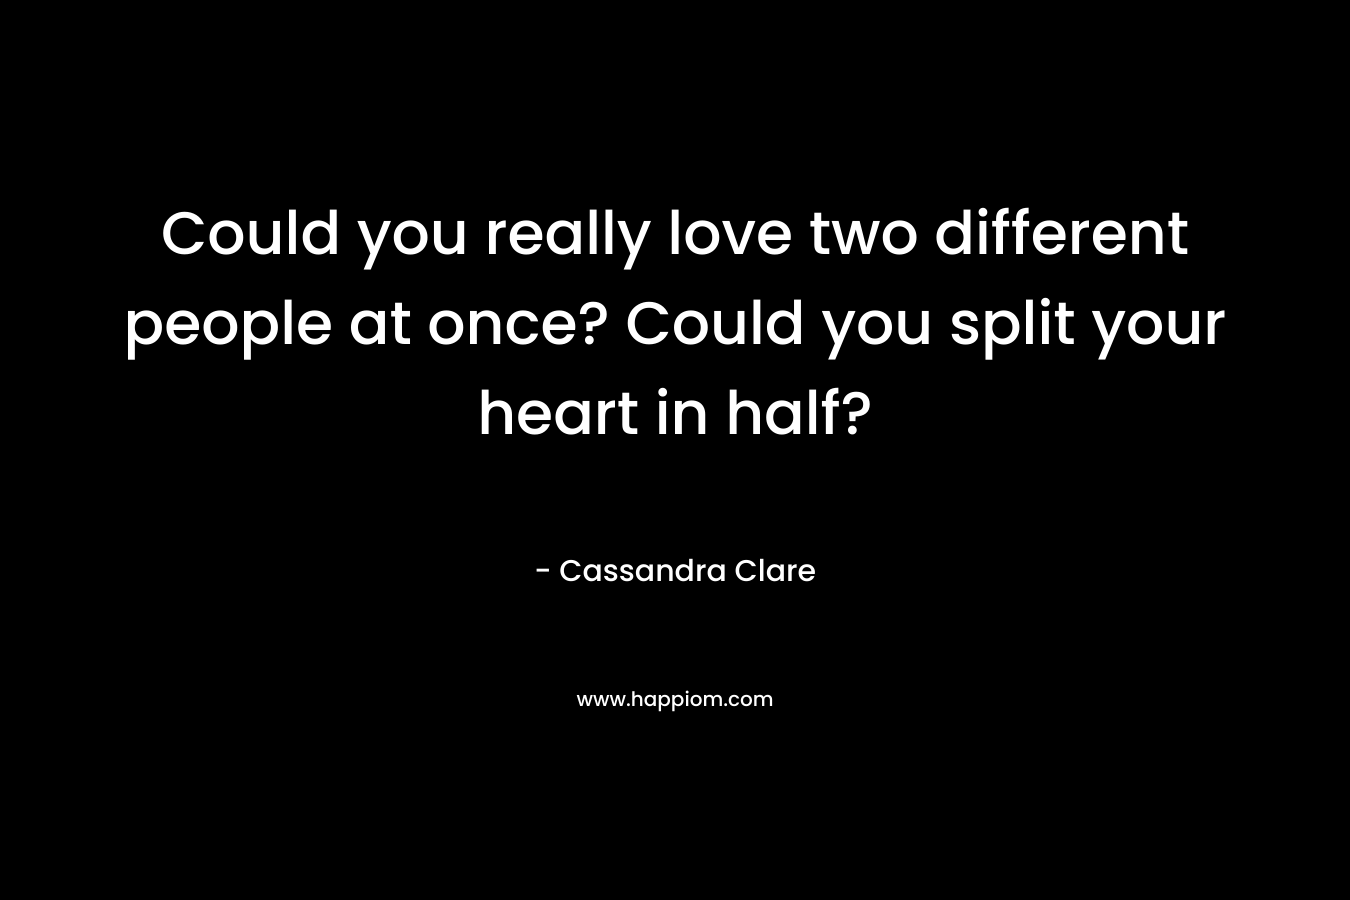 Could you really love two different people at once? Could you split your heart in half?